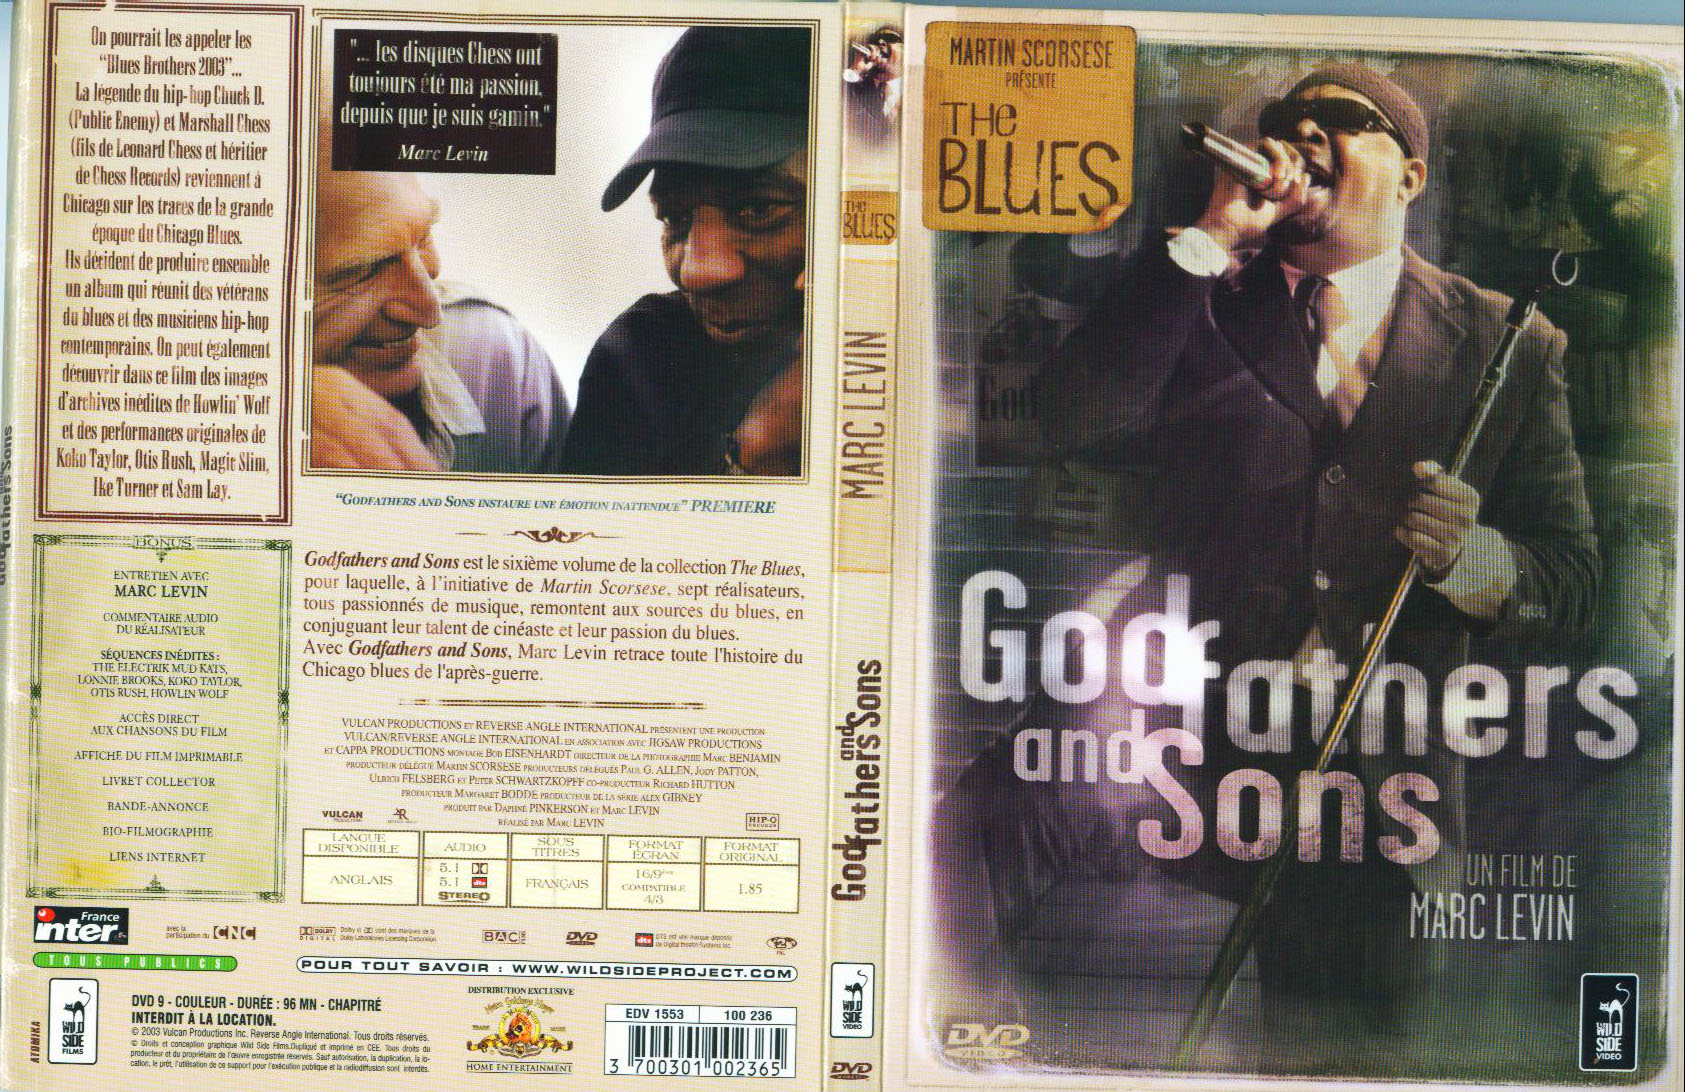 Jaquette DVD The blues - Godfathers and sons